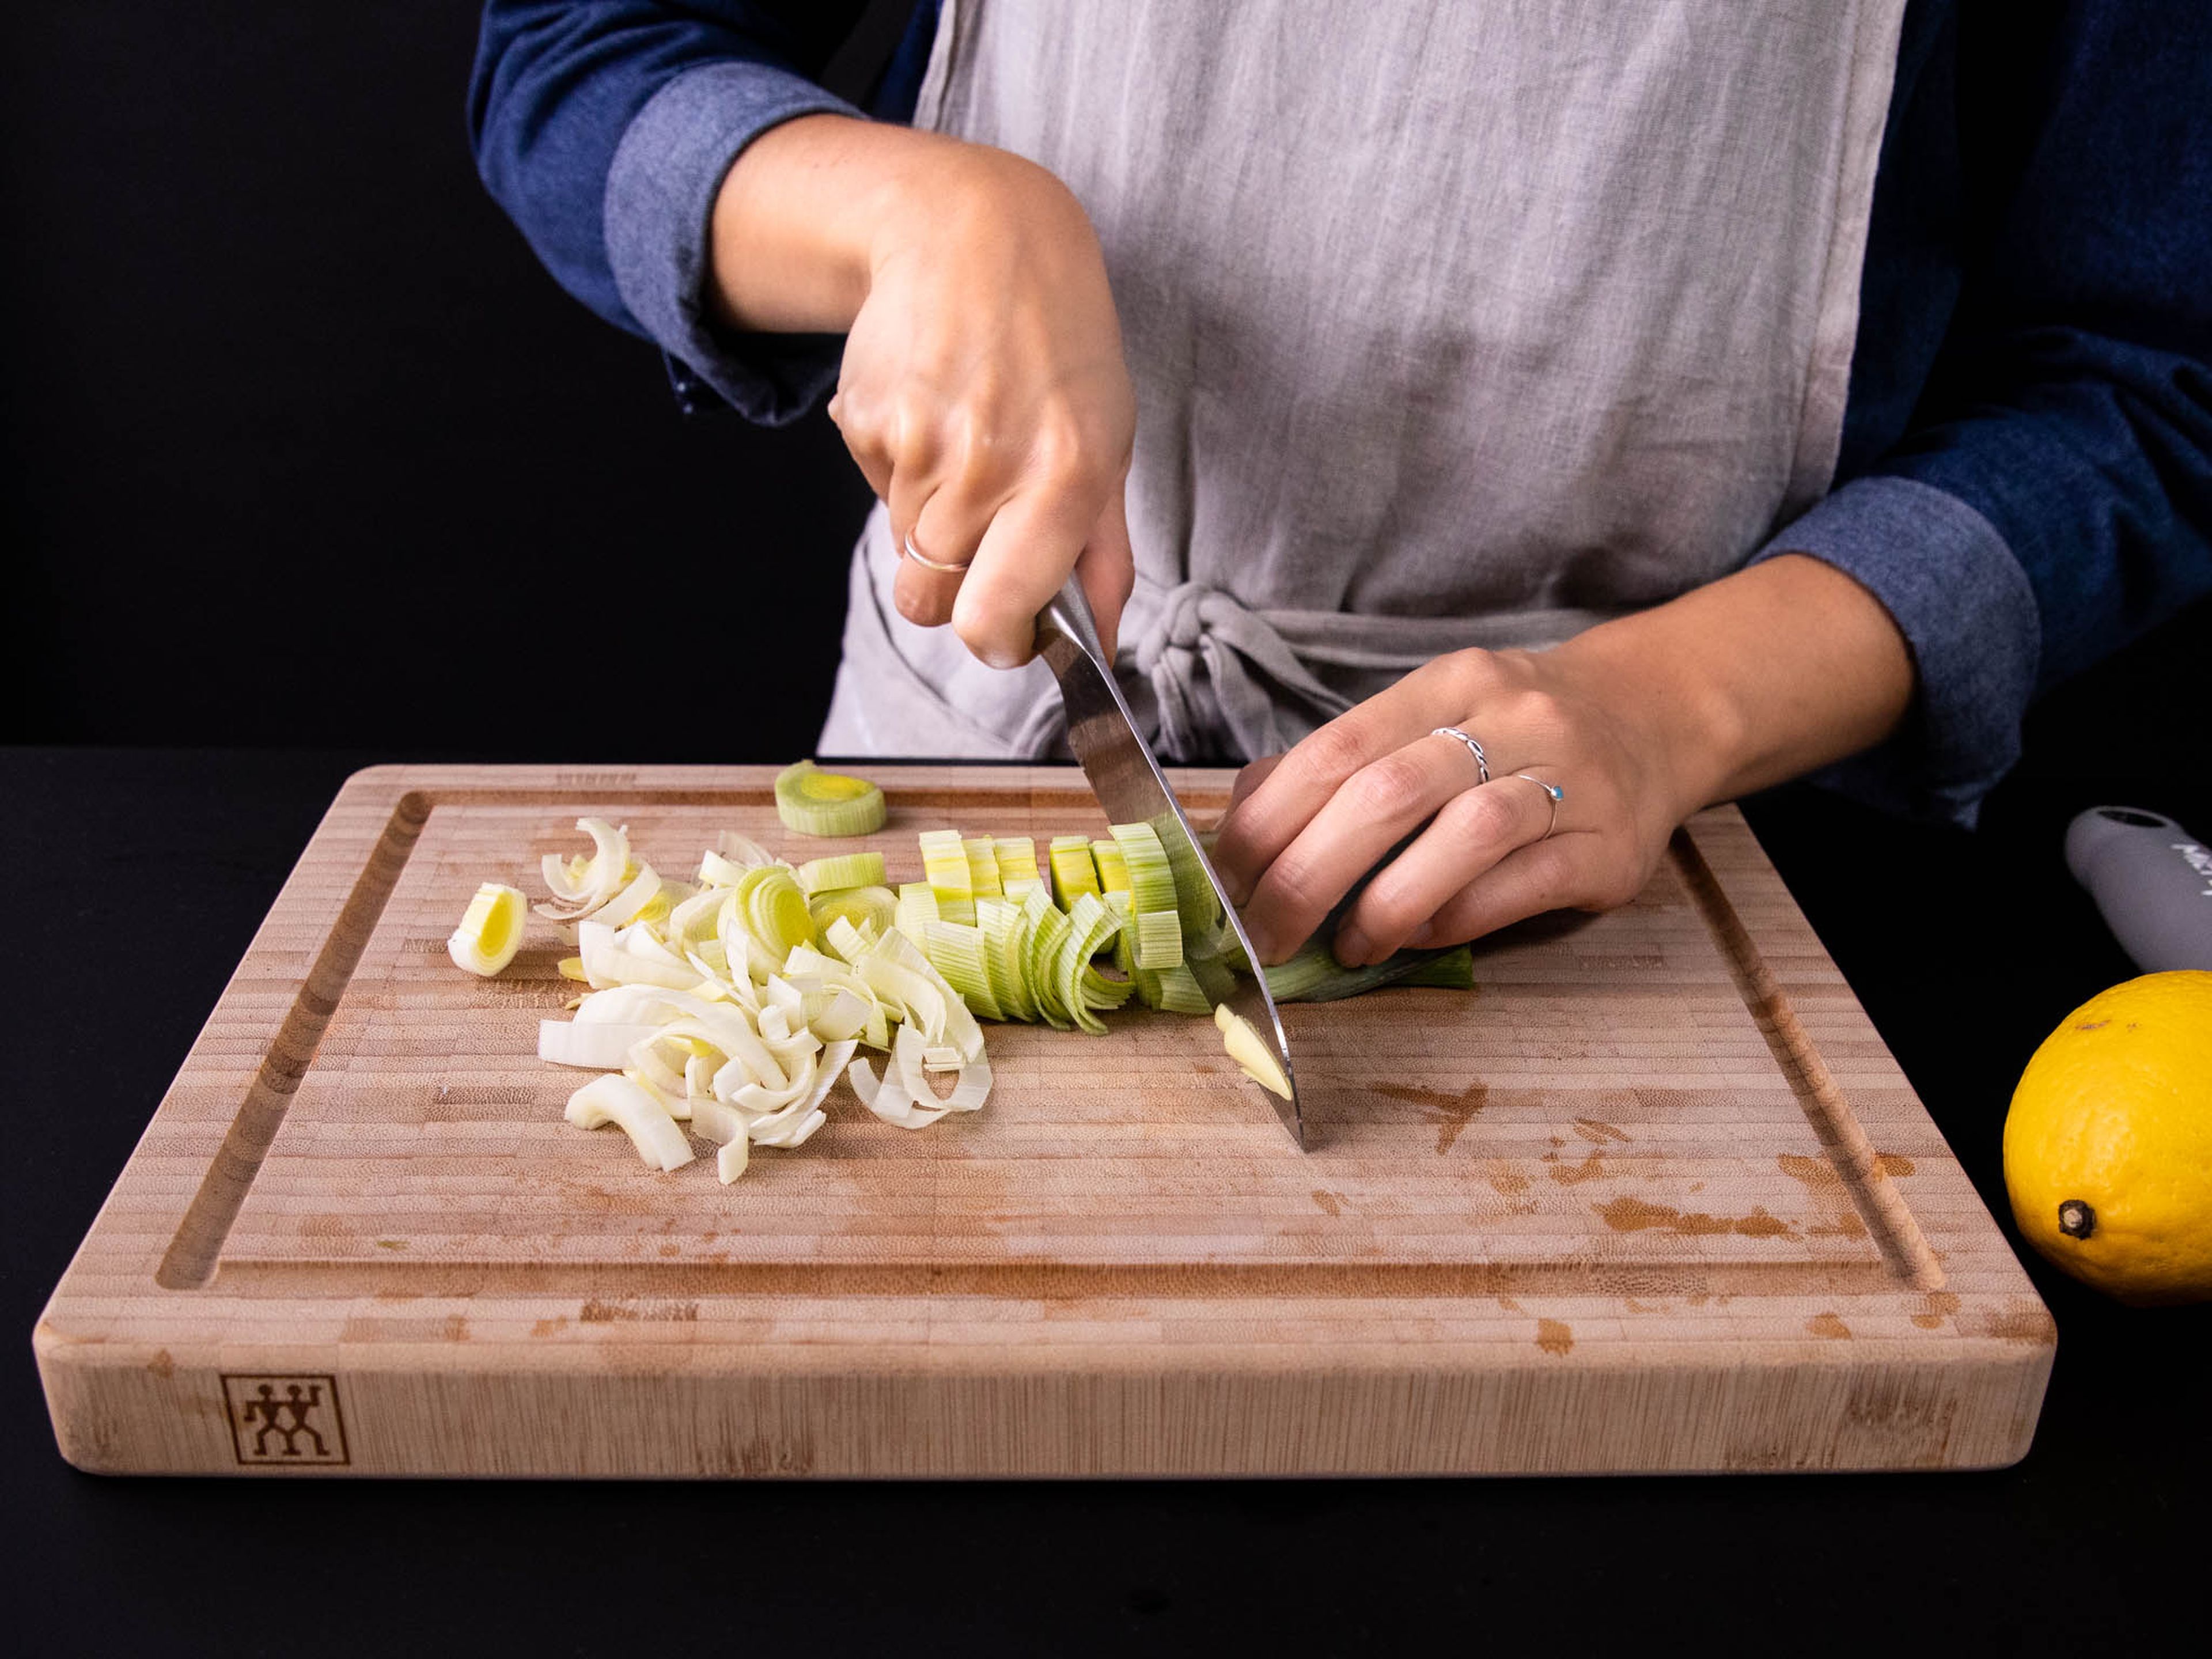 Thinly slice fennel and leek, saving any fennel fronds for garnish. Zest and juice lemon and set aside. Add leek to a large bowl of water and swish around, then let settle. The dirt will fall to the bottom, and the clean leek will float. Remove leek and drain.